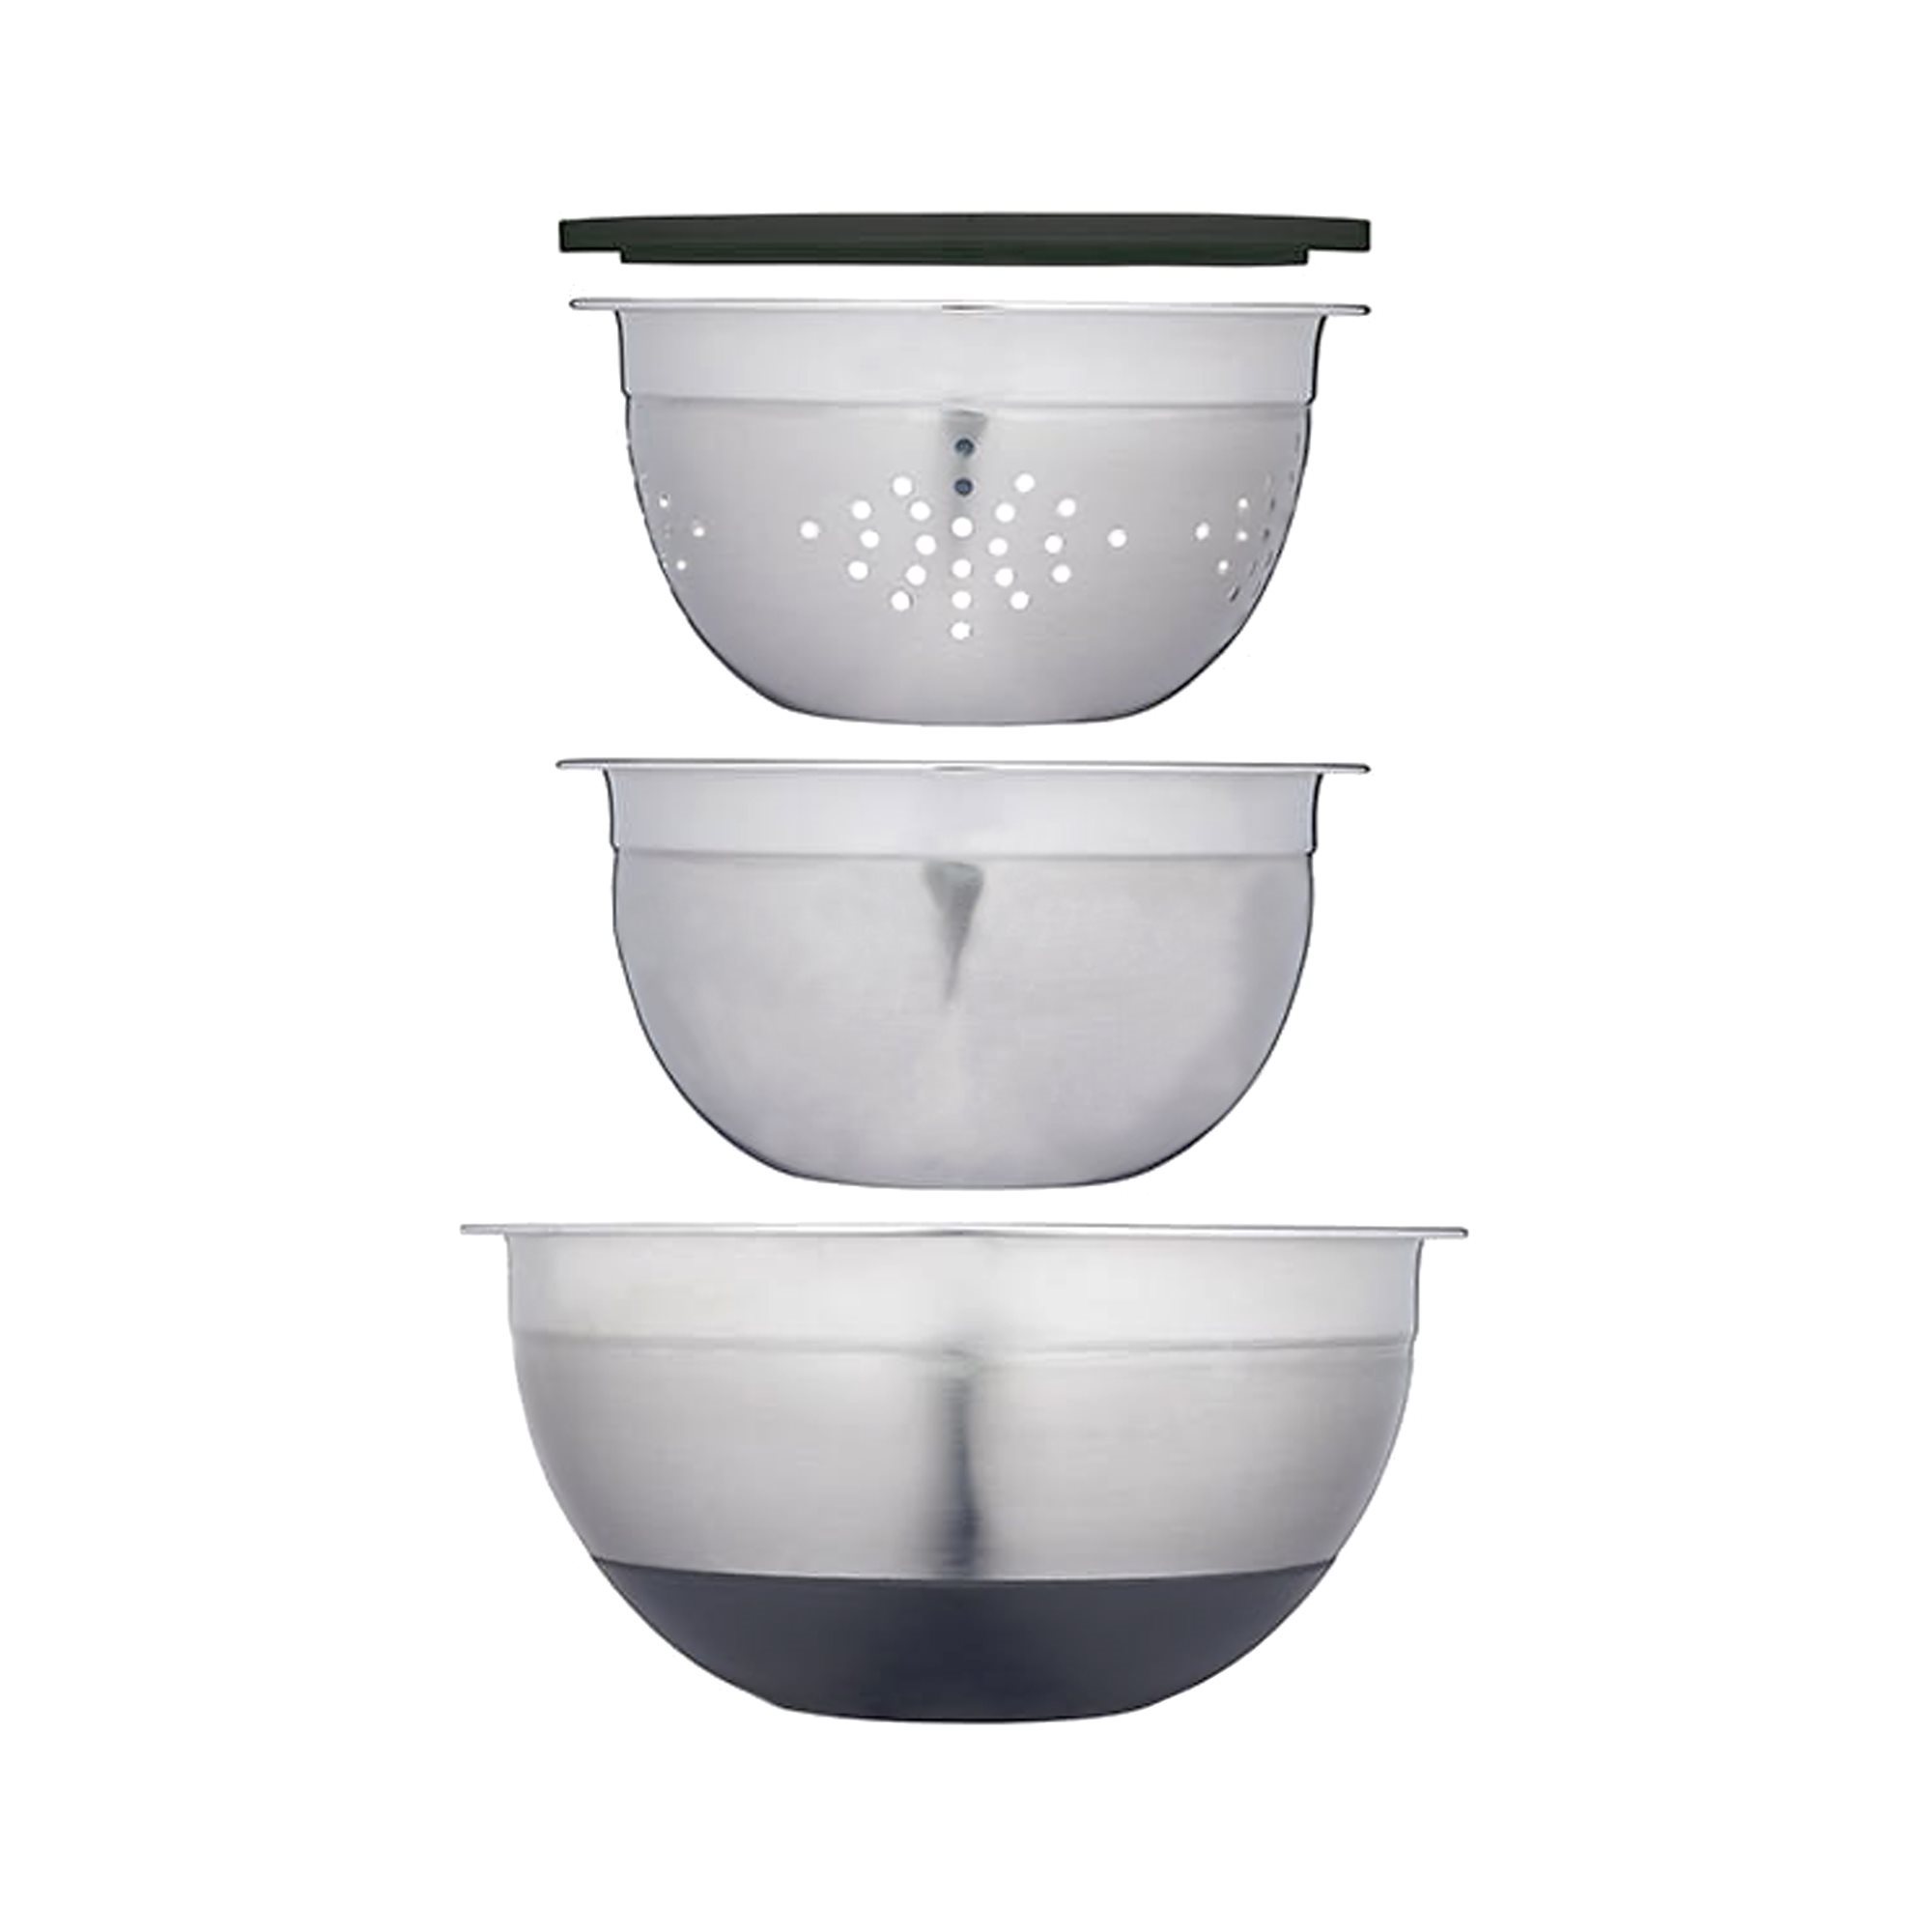 Mixing Bowls with Lids Set, Stainless Steel Mixing Bowls with Airtight  Lids, Nesting Mixing Bowl Set for Space Saving Storage, Ideal for Cooking,  Baking - China Stainless Steel Mixing Bowl and Stainless